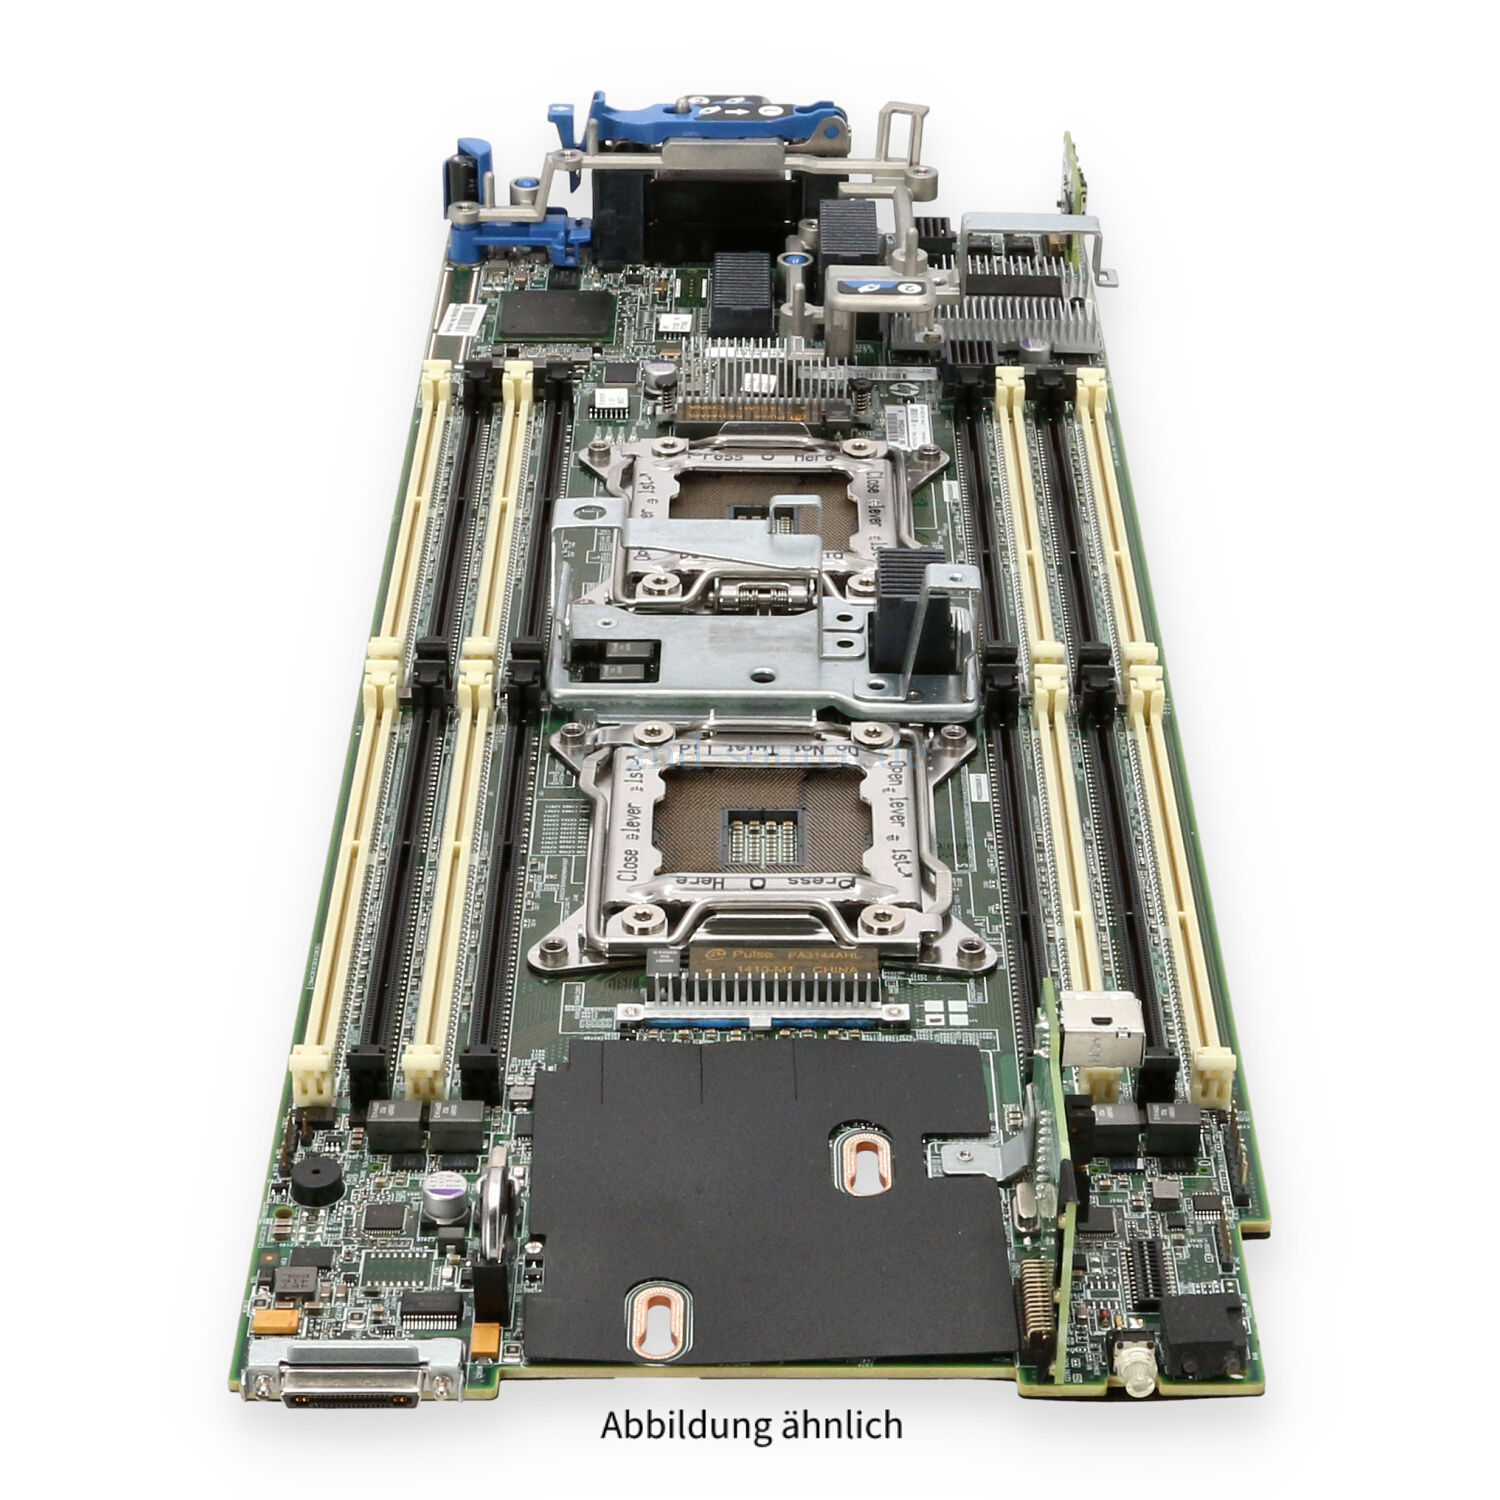 HPE Systemboard BL460c G8 738239-001 640870-007